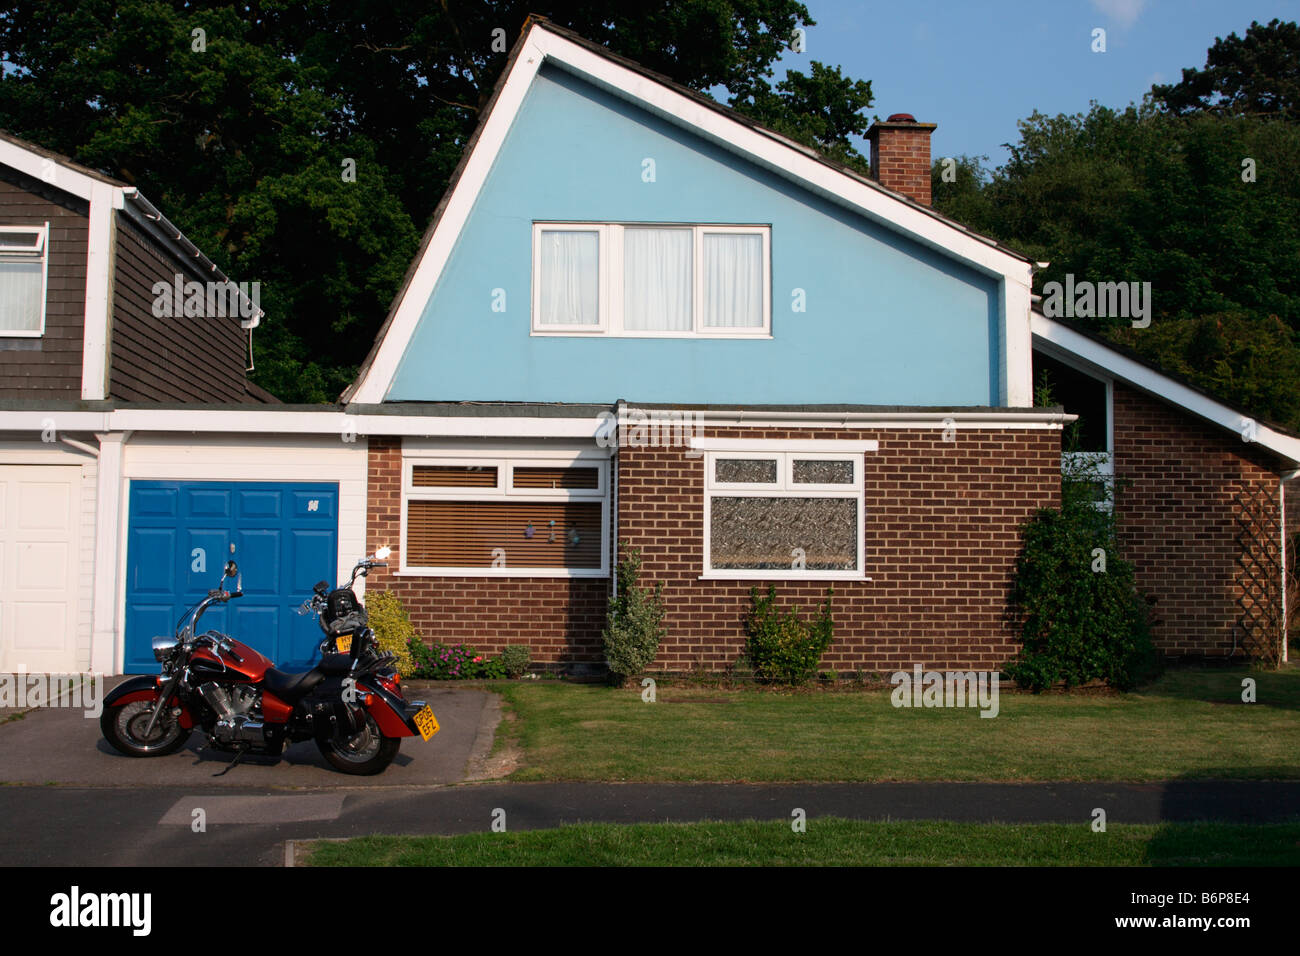 1960s suburban house Waterlooville, Portsmouth Hampshire UK with large red motorbike in front of garage in drive. Stock Photo